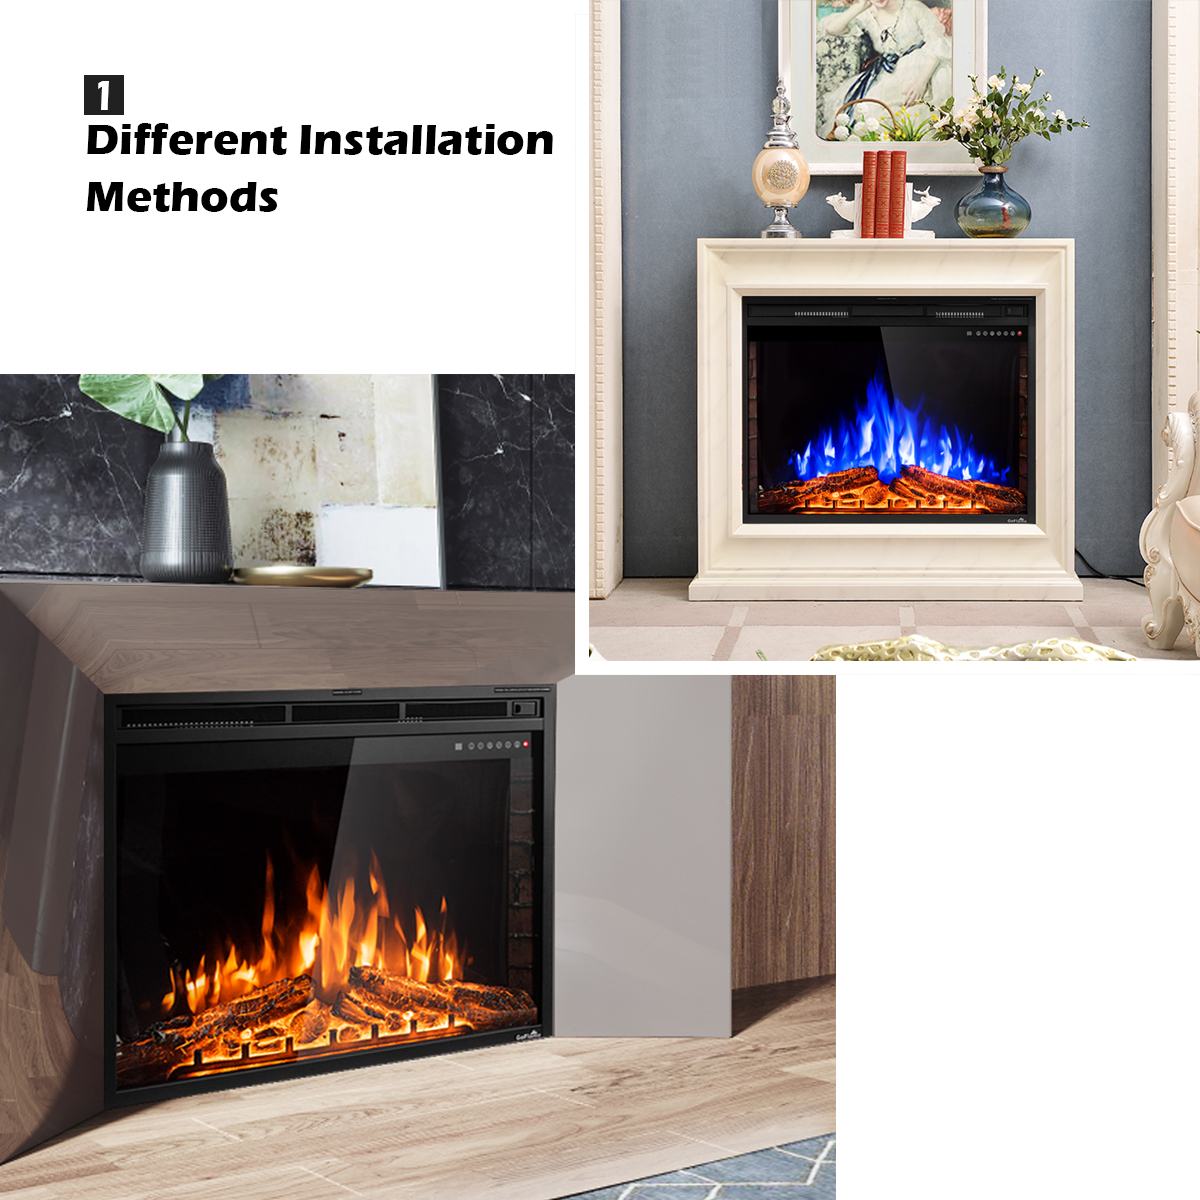 36 Inch Fireplace Insert New Goflame 36 750w 1500w Fireplace Heater Electric Embedded Insert Timer Flame Remote